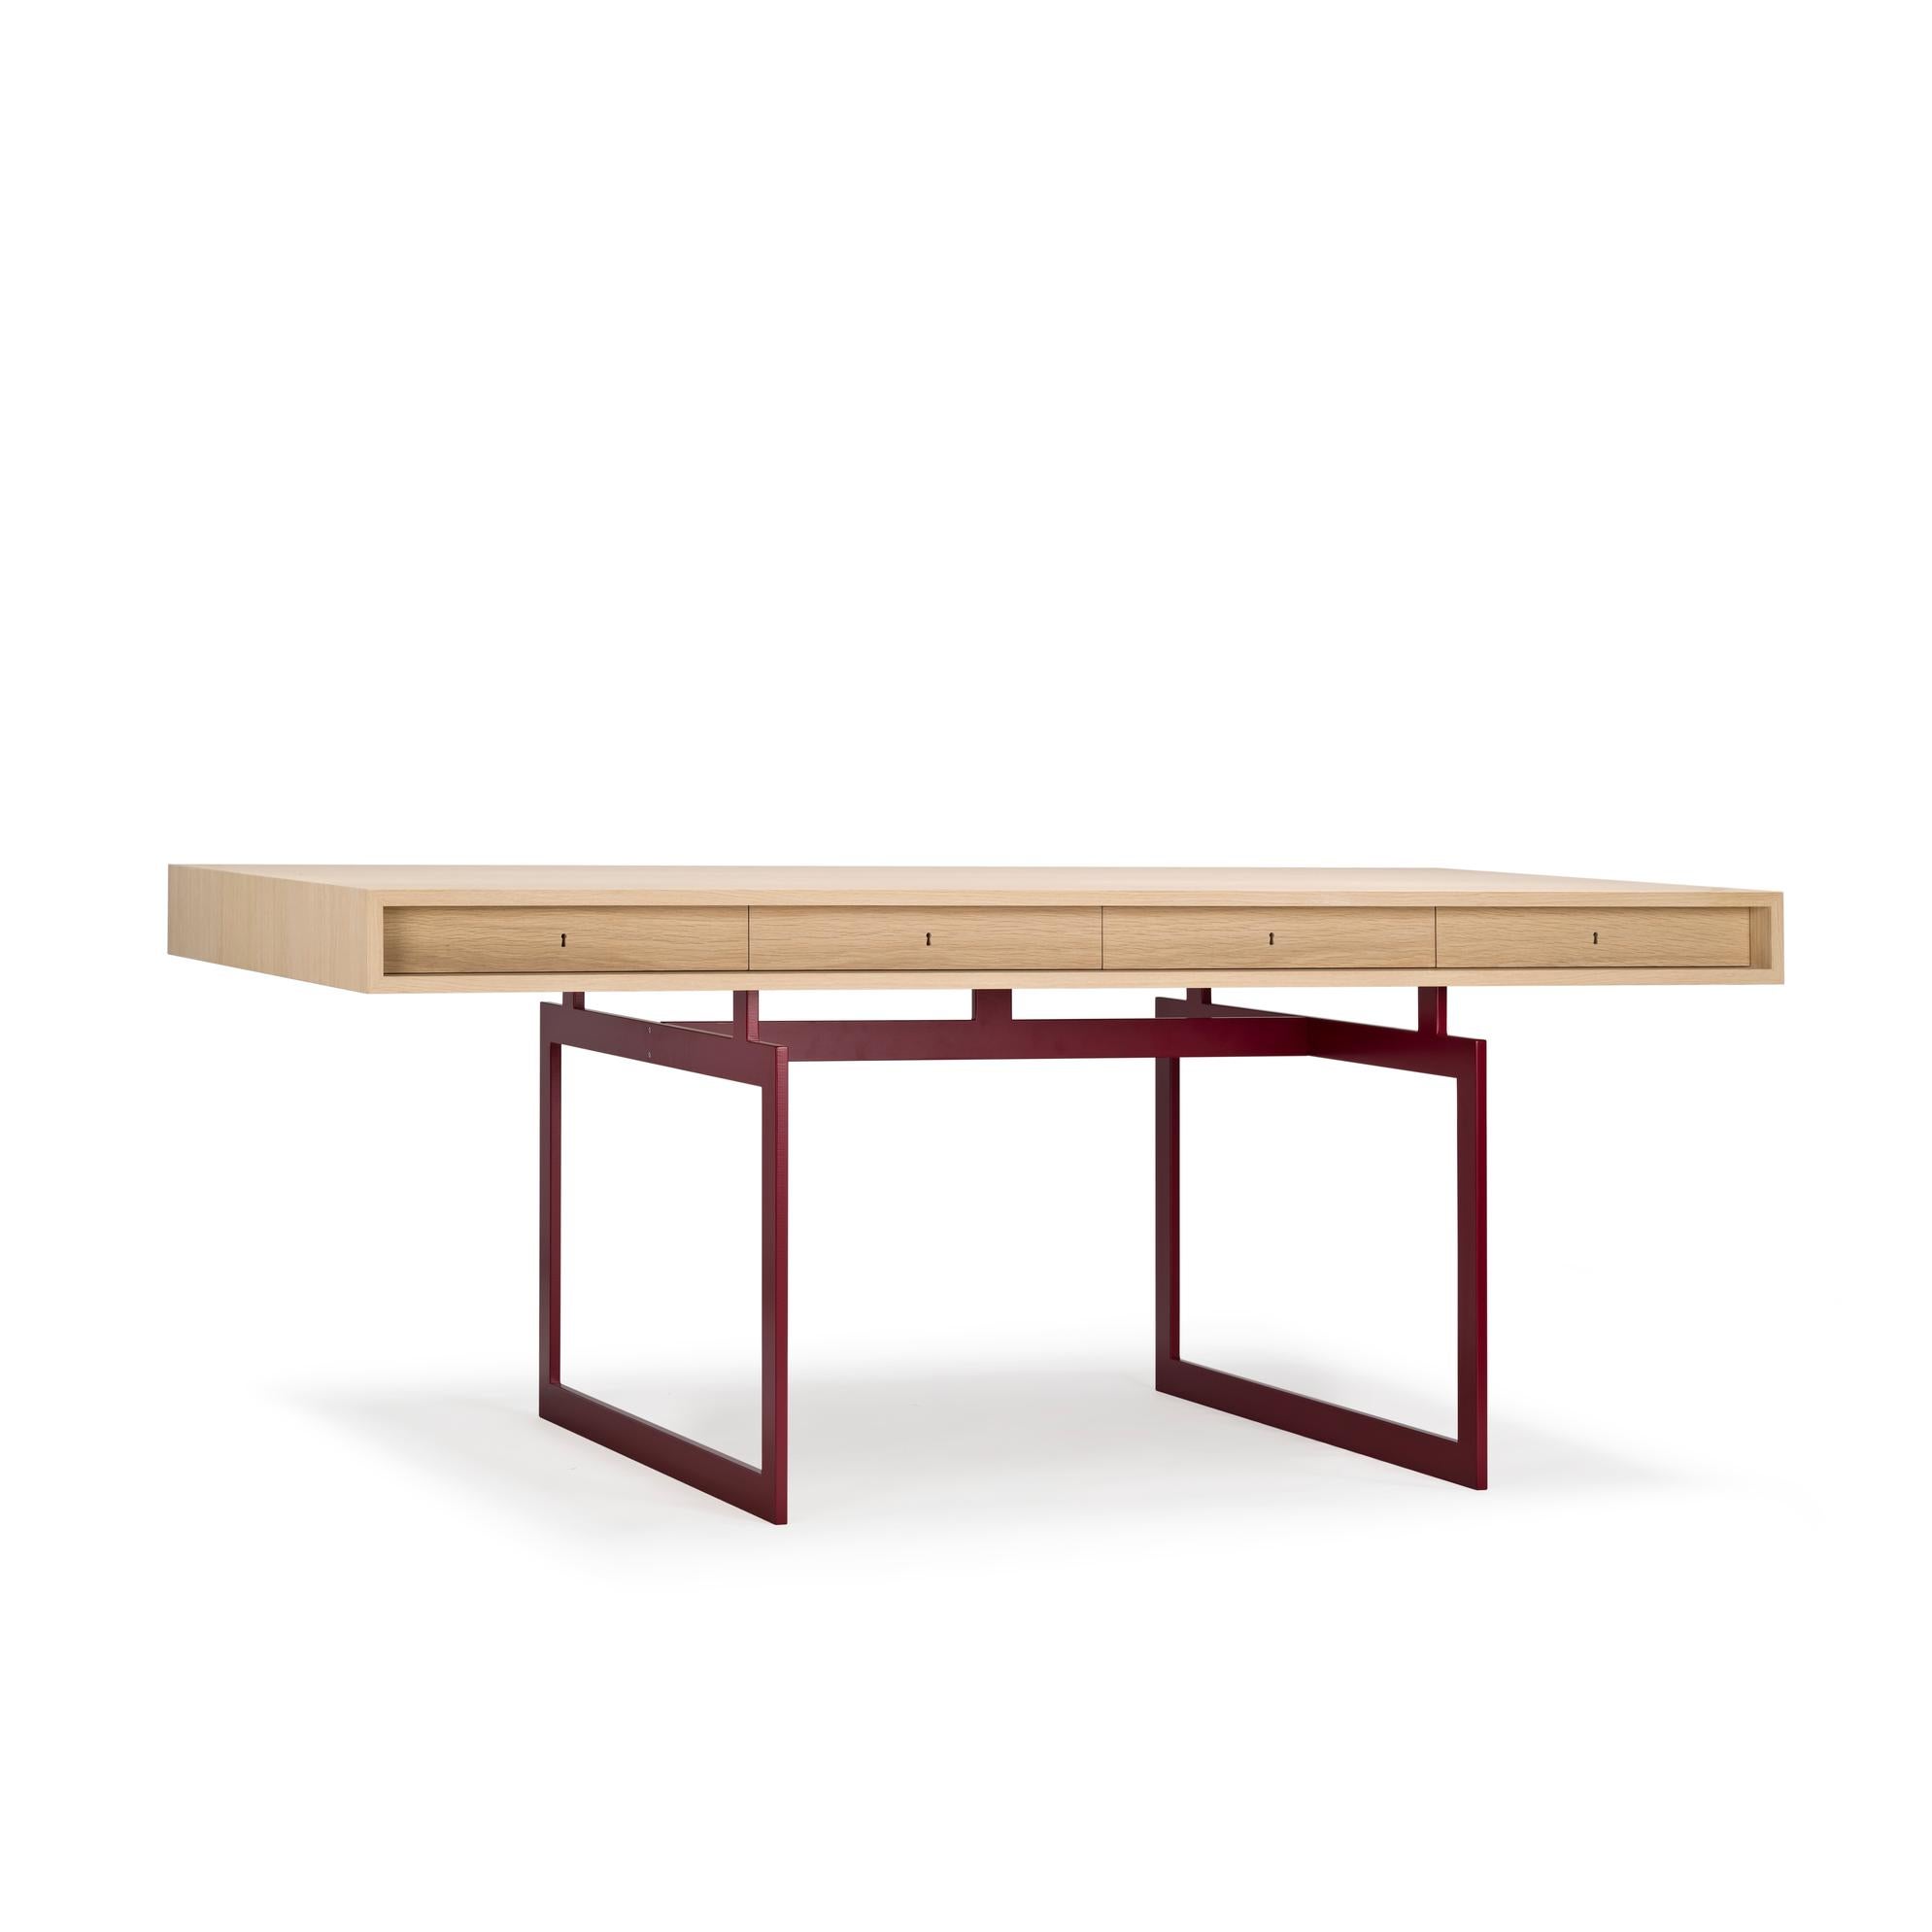 Table designed by Bodil Kjær in 1959. 

We are proud to present our first design from a Danish designer. In this case, Danish architect, professor, and designer, Bodil Kjær. The iconic desk, designed in 1959, was the first of its kind with its